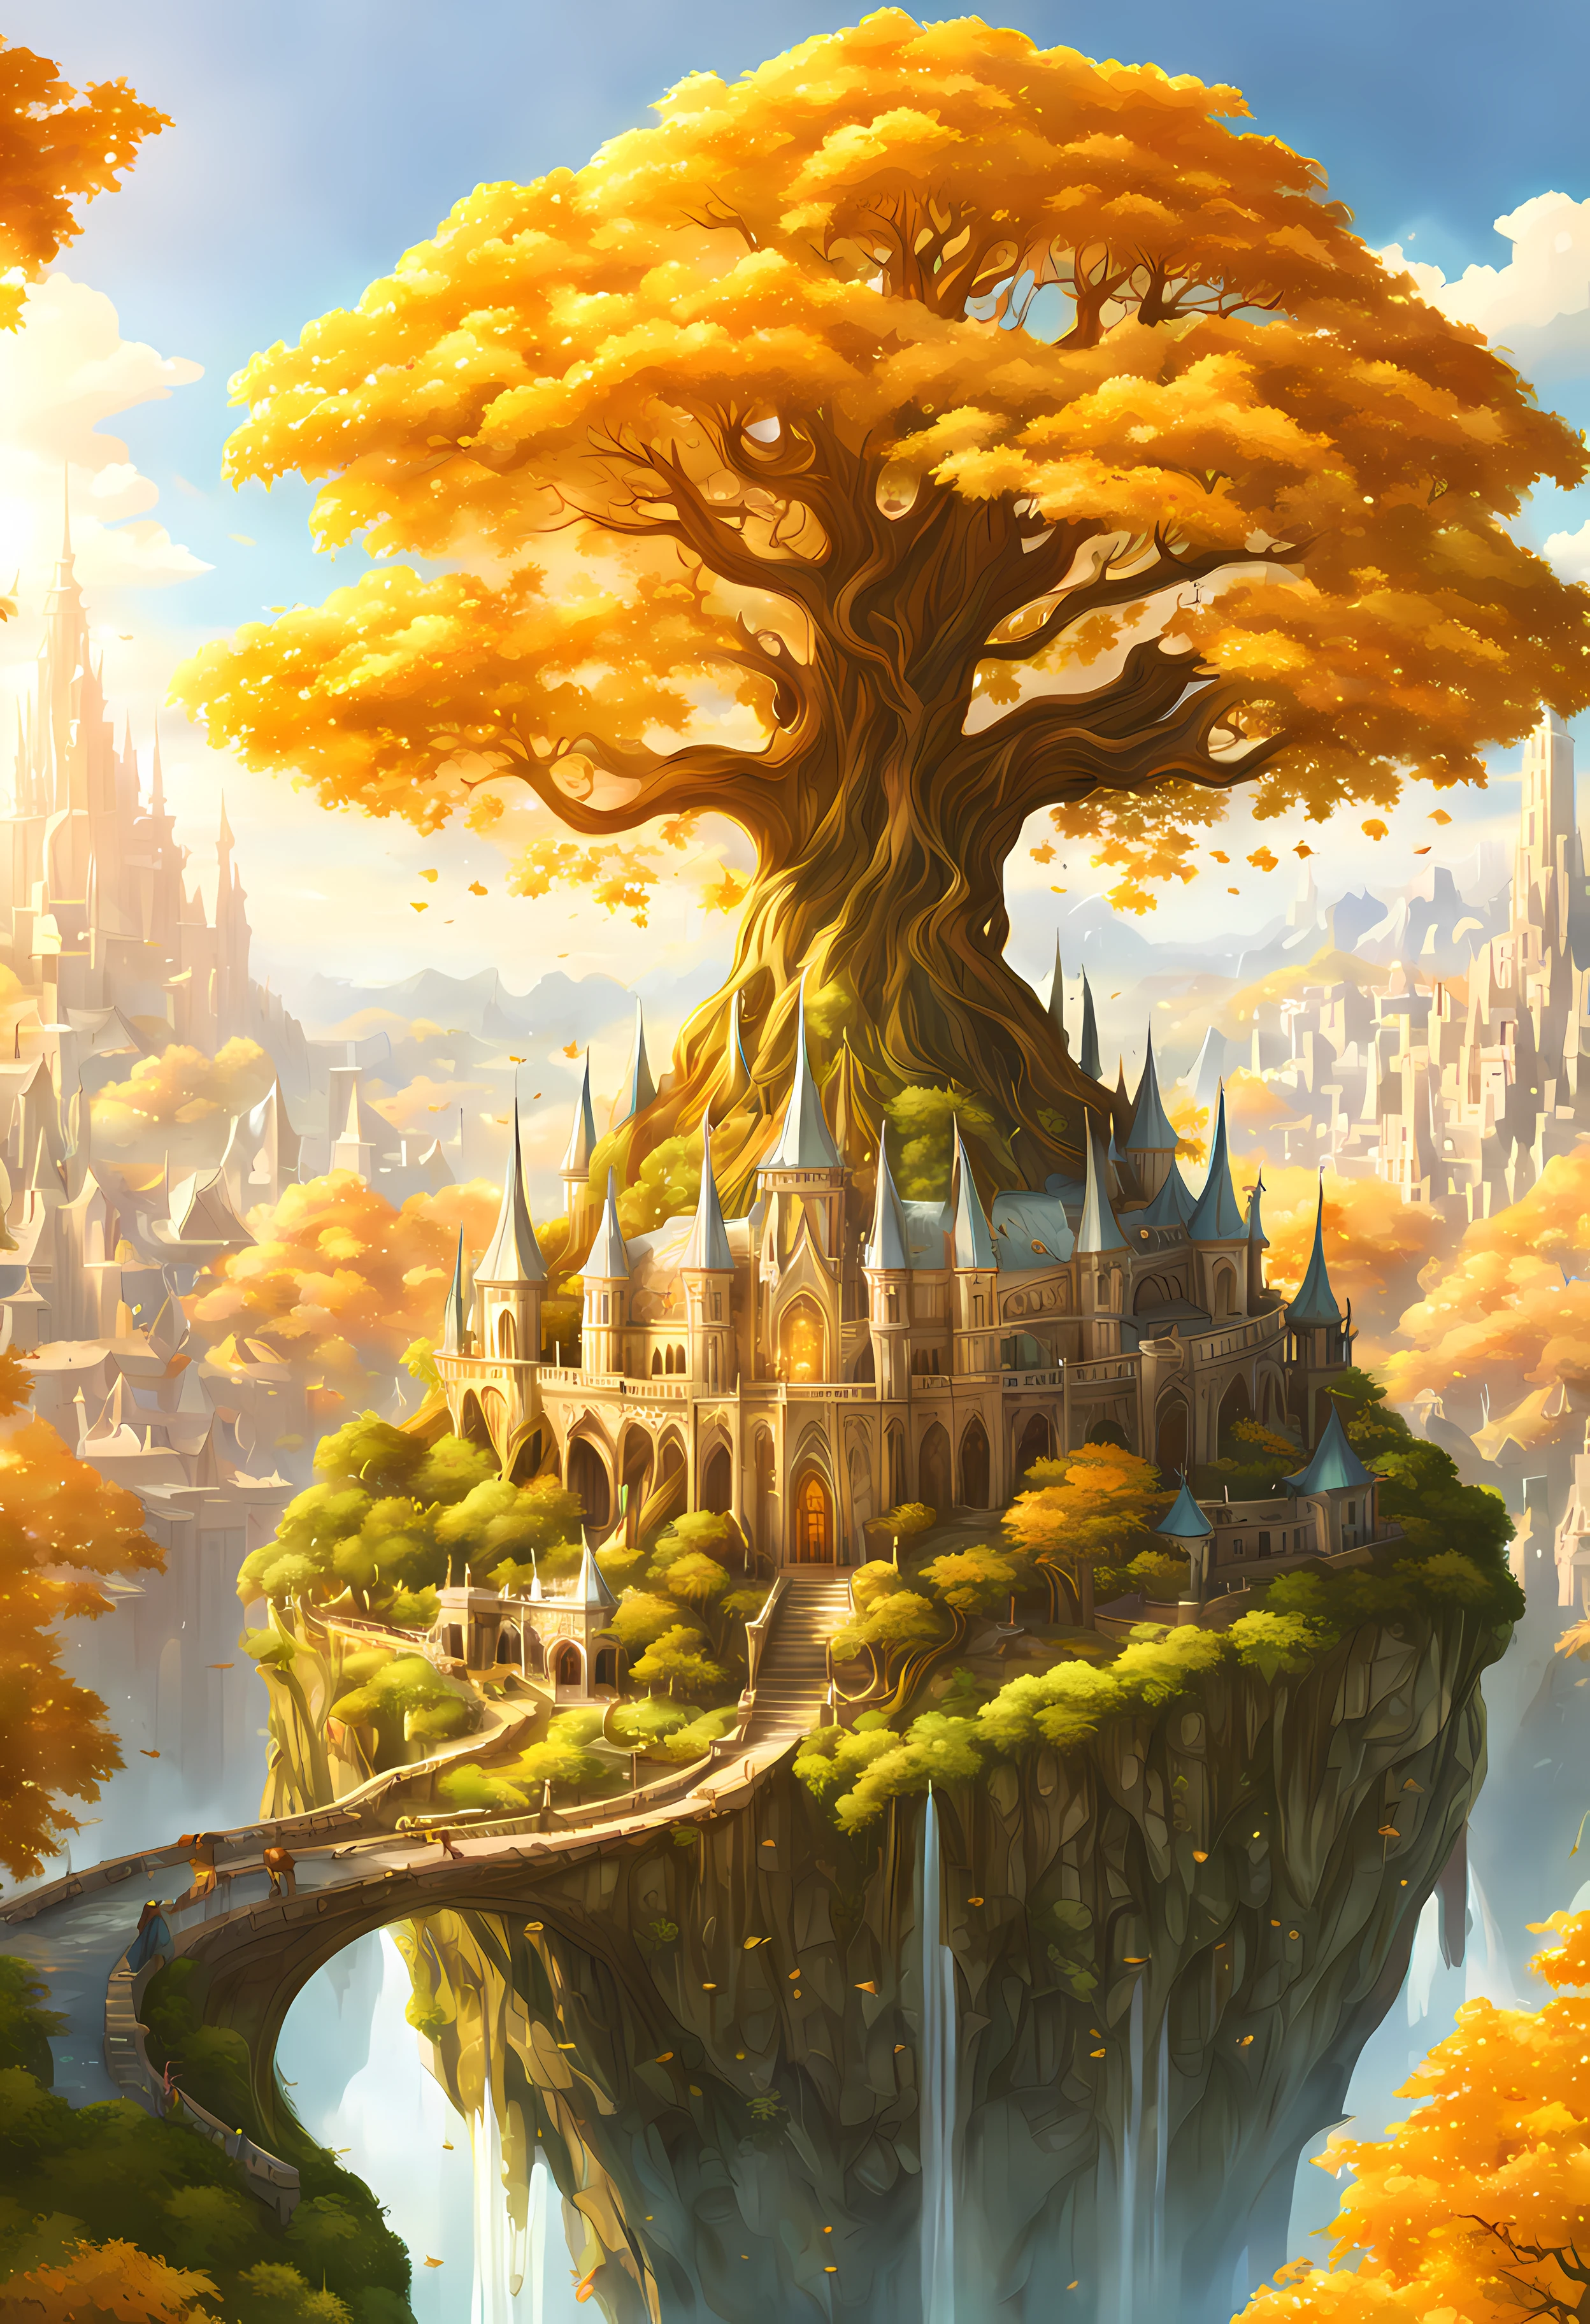 Unparalleled masterpiece, 16k, ultra detailed, approaching perfection, (cartoon style:1.3) | A colossal magical (elven world tree) amidst an ancient elven city. | The world tree stands (tall), with branches reaching towards the sky and glowing ((golden leaves that emit a soft ethereal light)). | The distant view capturing the grandeur of the world tree against the backdrop of the magnificent elven city. | The city is filled with intricate elven architecture showcasing rich history and enchanting beauty of the (elegant) civilization. | The scene takes place during (breathtaking sunny day) adding a touch of (mysticism and wonder) | More Detail